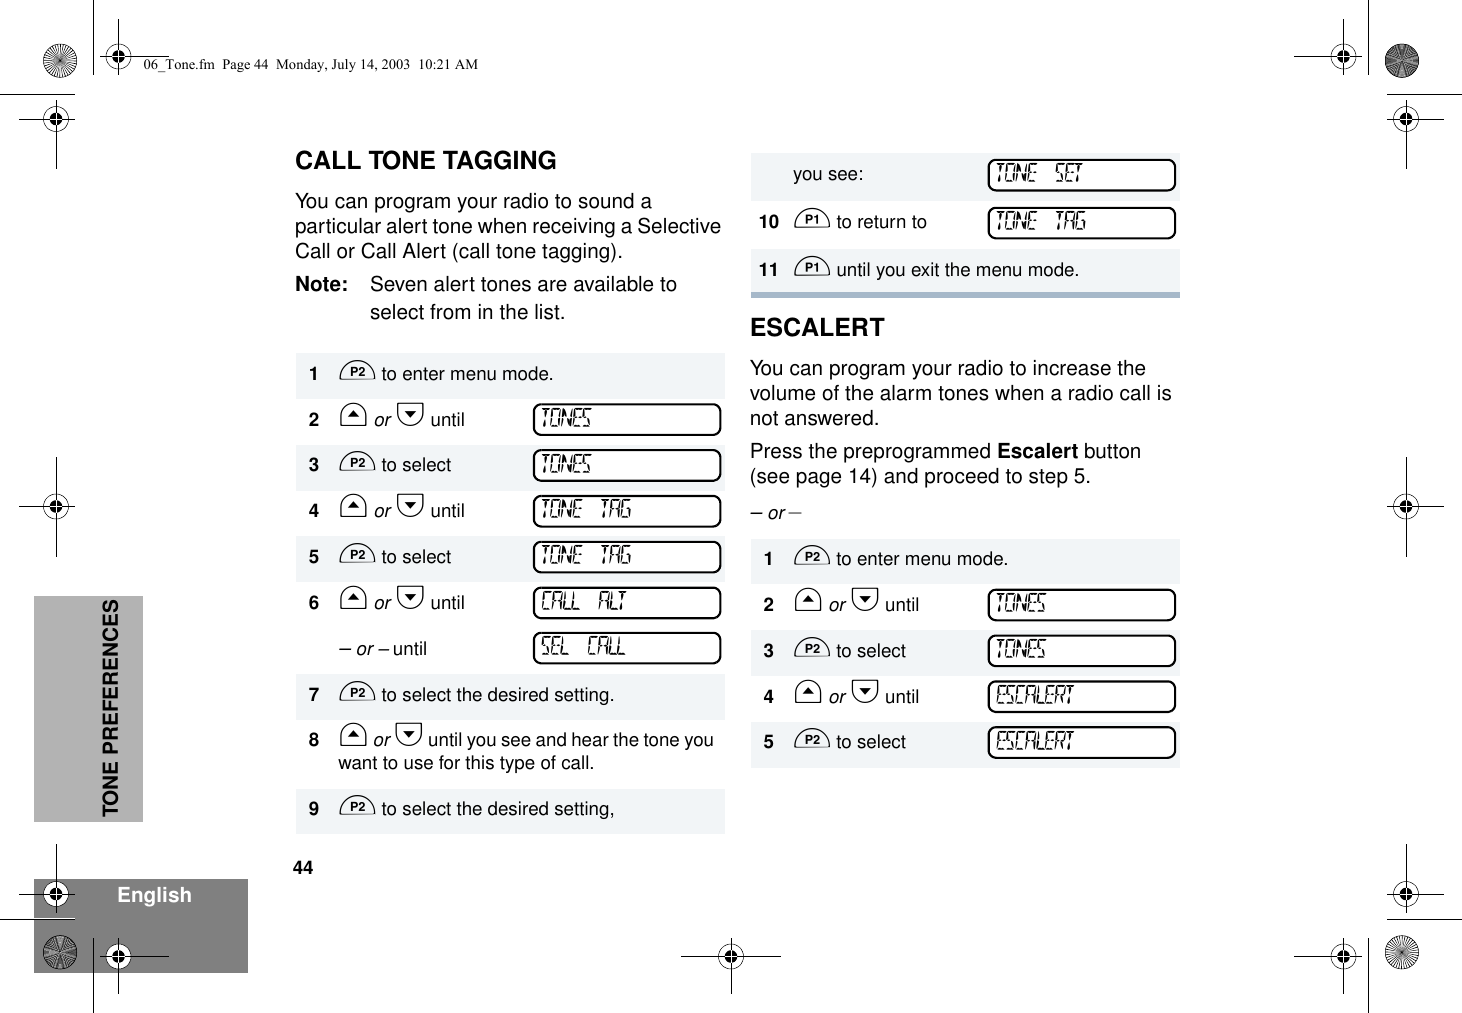 44EnglishTONE PREFERENCESCALL TONE TAGGINGYou can program your radio to sound a particular alert tone when receiving a Selective Call or Call Alert (call tone tagging).Note: Seven alert tones are available to select from in the list. ESCALERTYou can program your radio to increase the volume of the alarm tones when a radio call is not answered.Press the preprogrammed Escalert button (see page 14) and proceed to step 5.– or –1D to enter menu mode.2G or H until3D to select4G or H until5D to select6G or H until – or – until7D to select the desired setting.8G or H until you see and hear the tone you want to use for this type of call.9D to select the desired setting,TONESTONESTONE TAGTONE TAGCALL ALTSEL CALLyou see:10 C to return to 11 C until you exit the menu mode.1D to enter menu mode.2G or H until3D to select4G or H until5D to selectTONE SETTONE TAGTONESTONESESCALERTESCALERT06_Tone.fm  Page 44  Monday, July 14, 2003  10:21 AM